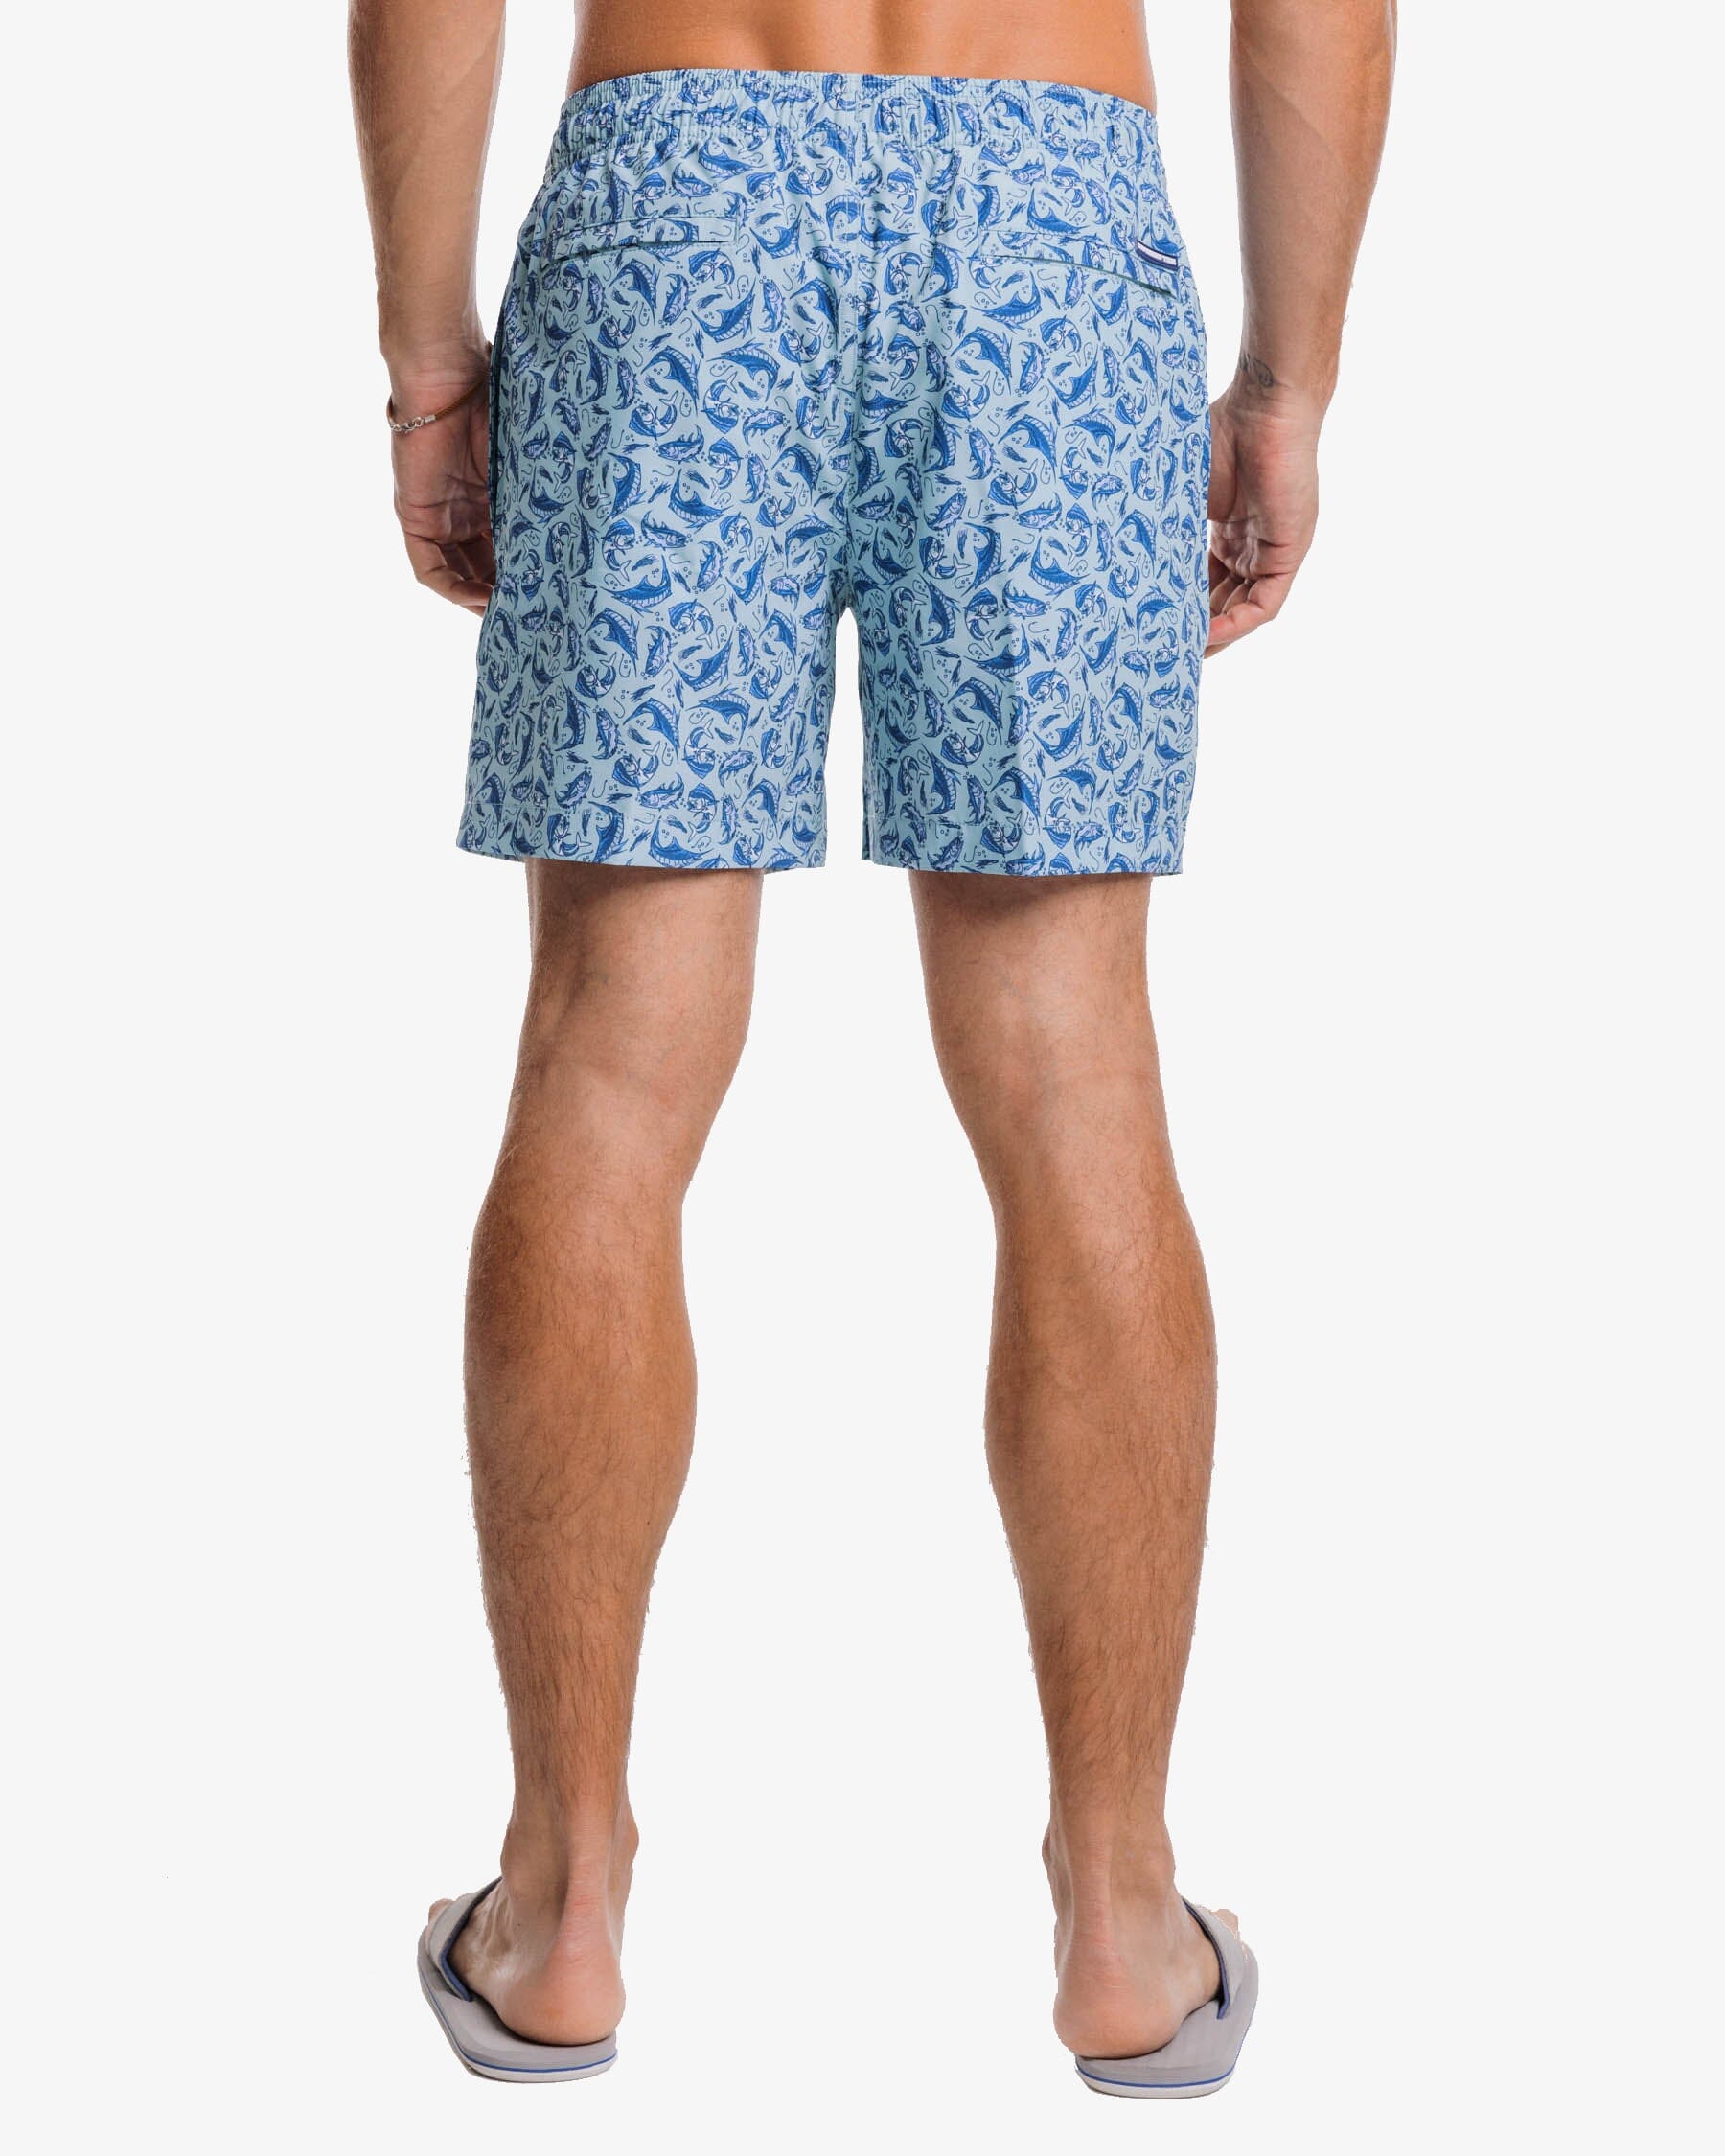 Southern Tide Catch You Later Swim Trunk - Turquoise Sea